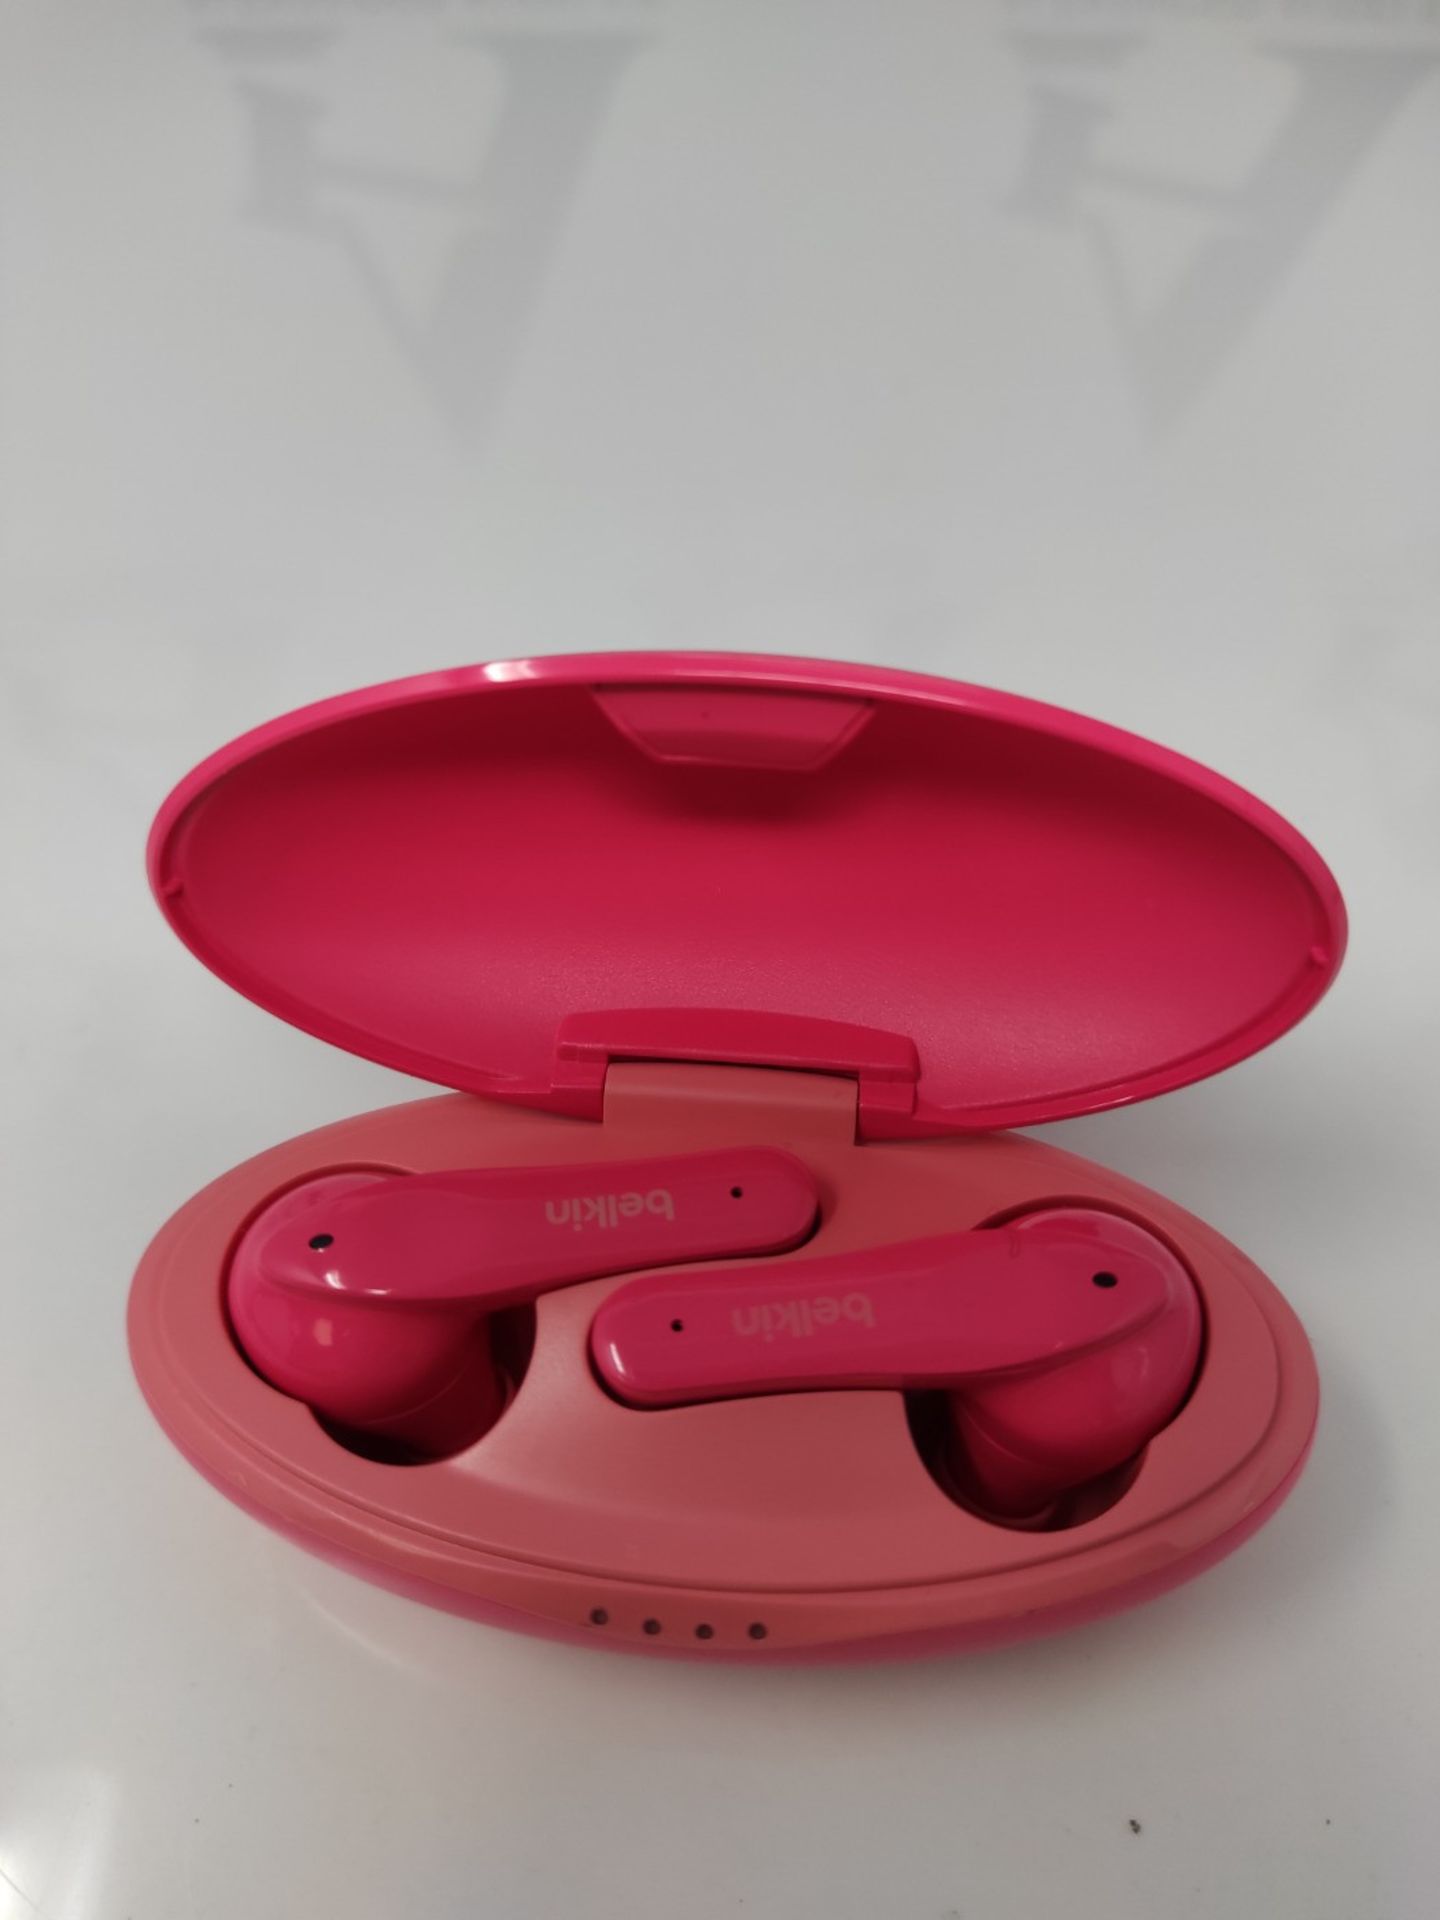 Belkin SOUNDFORM Nano, True Wireless Earbuds for Kids, 85dB Limit for Ear Protection, - Image 2 of 2